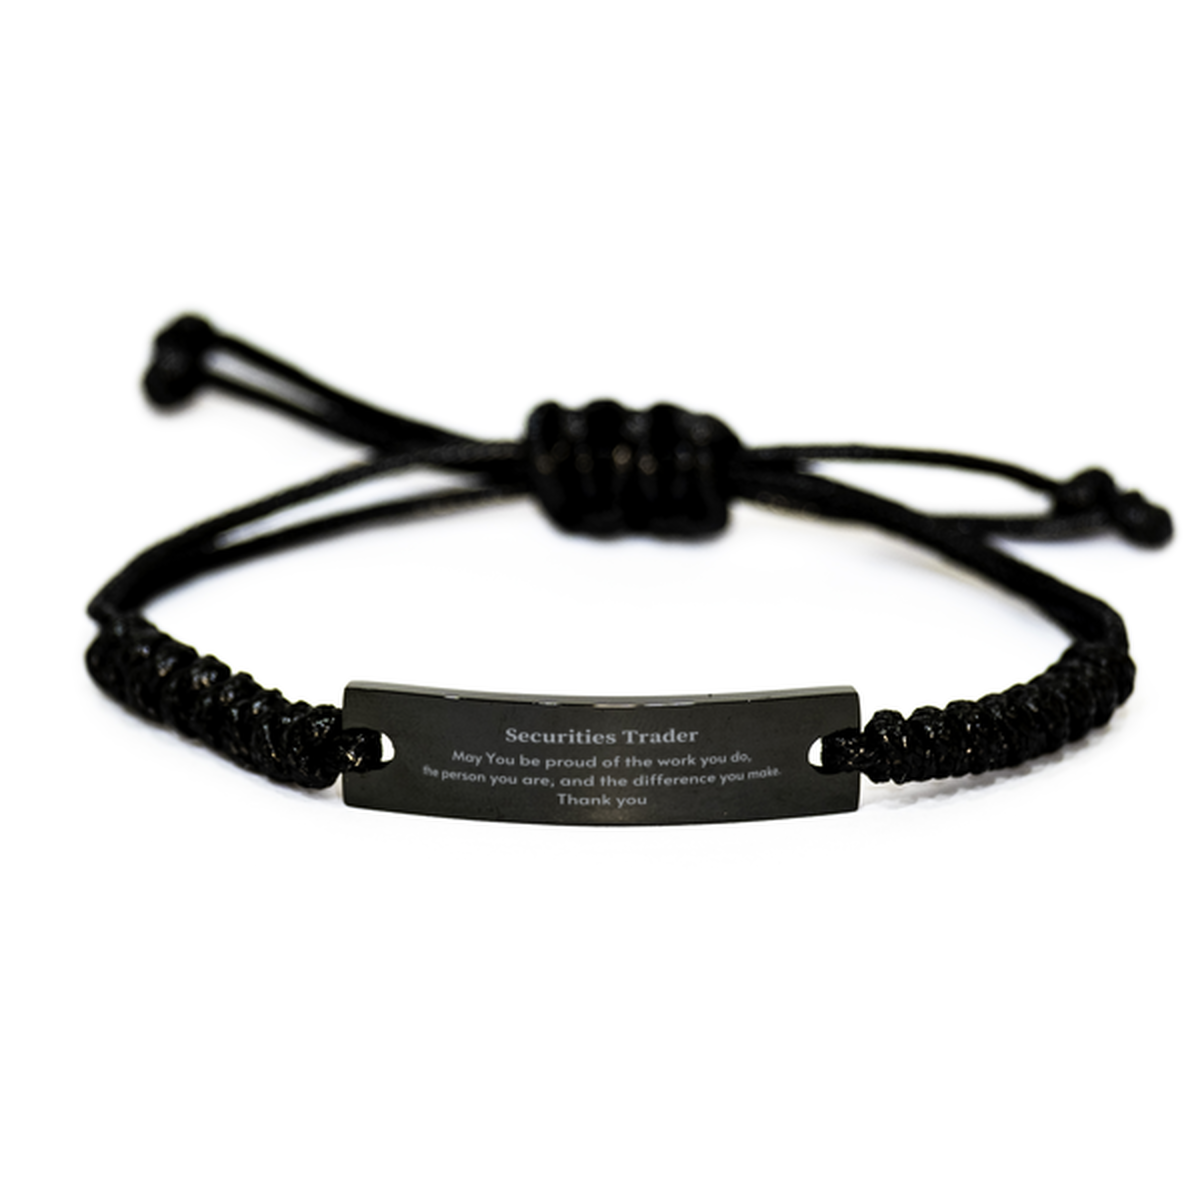 Heartwarming Black Rope Bracelet Retirement Coworkers Gifts for Securities Trader, Securities Trader May You be proud of the work you do, the person you are Gifts for Boss Men Women Friends